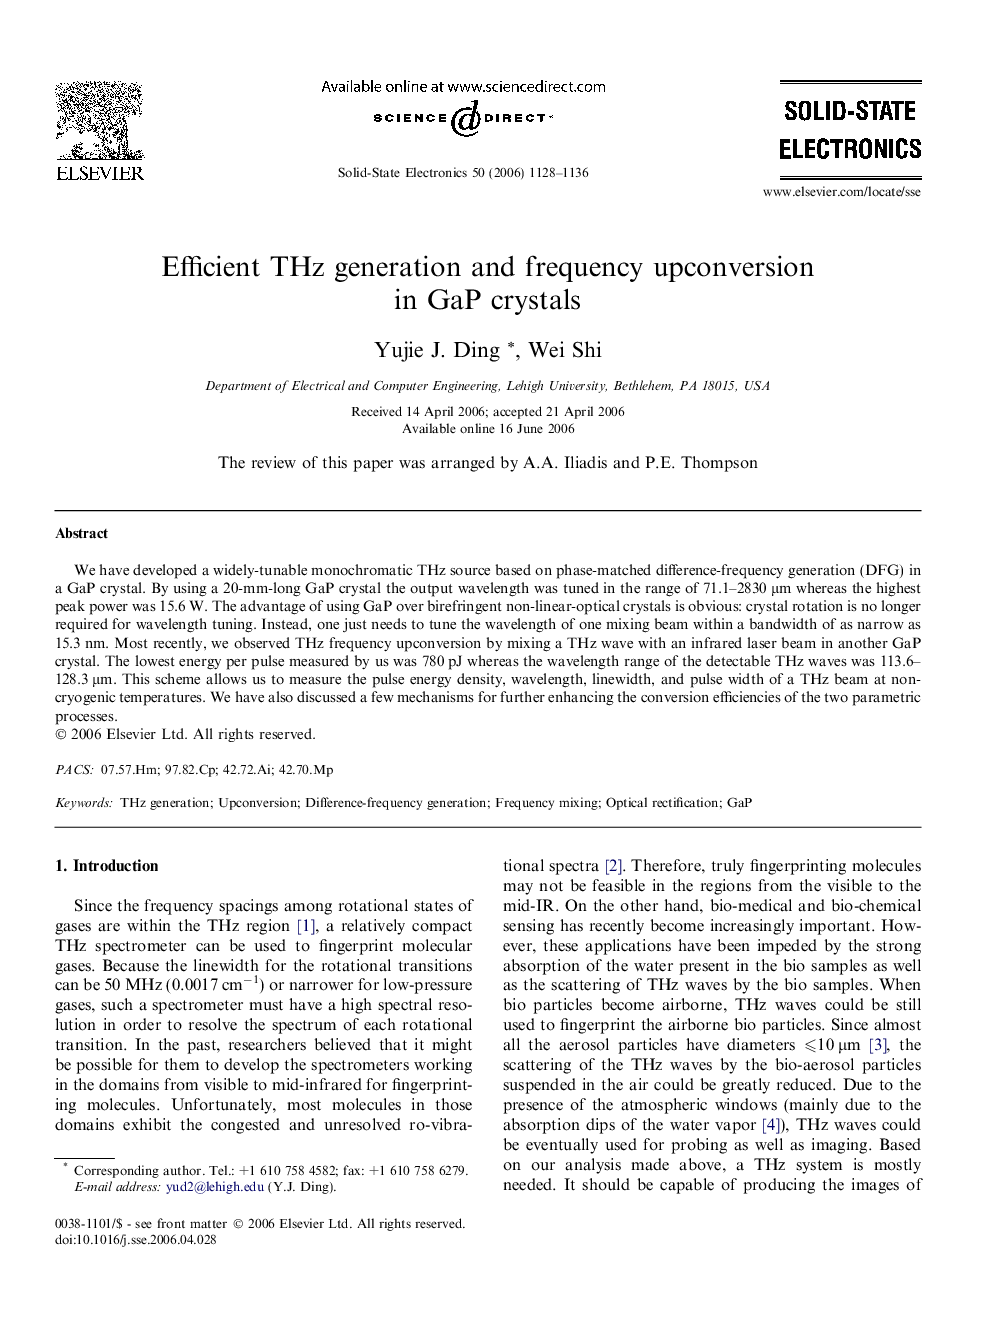 Efficient THz generation and frequency upconversion in GaP crystals